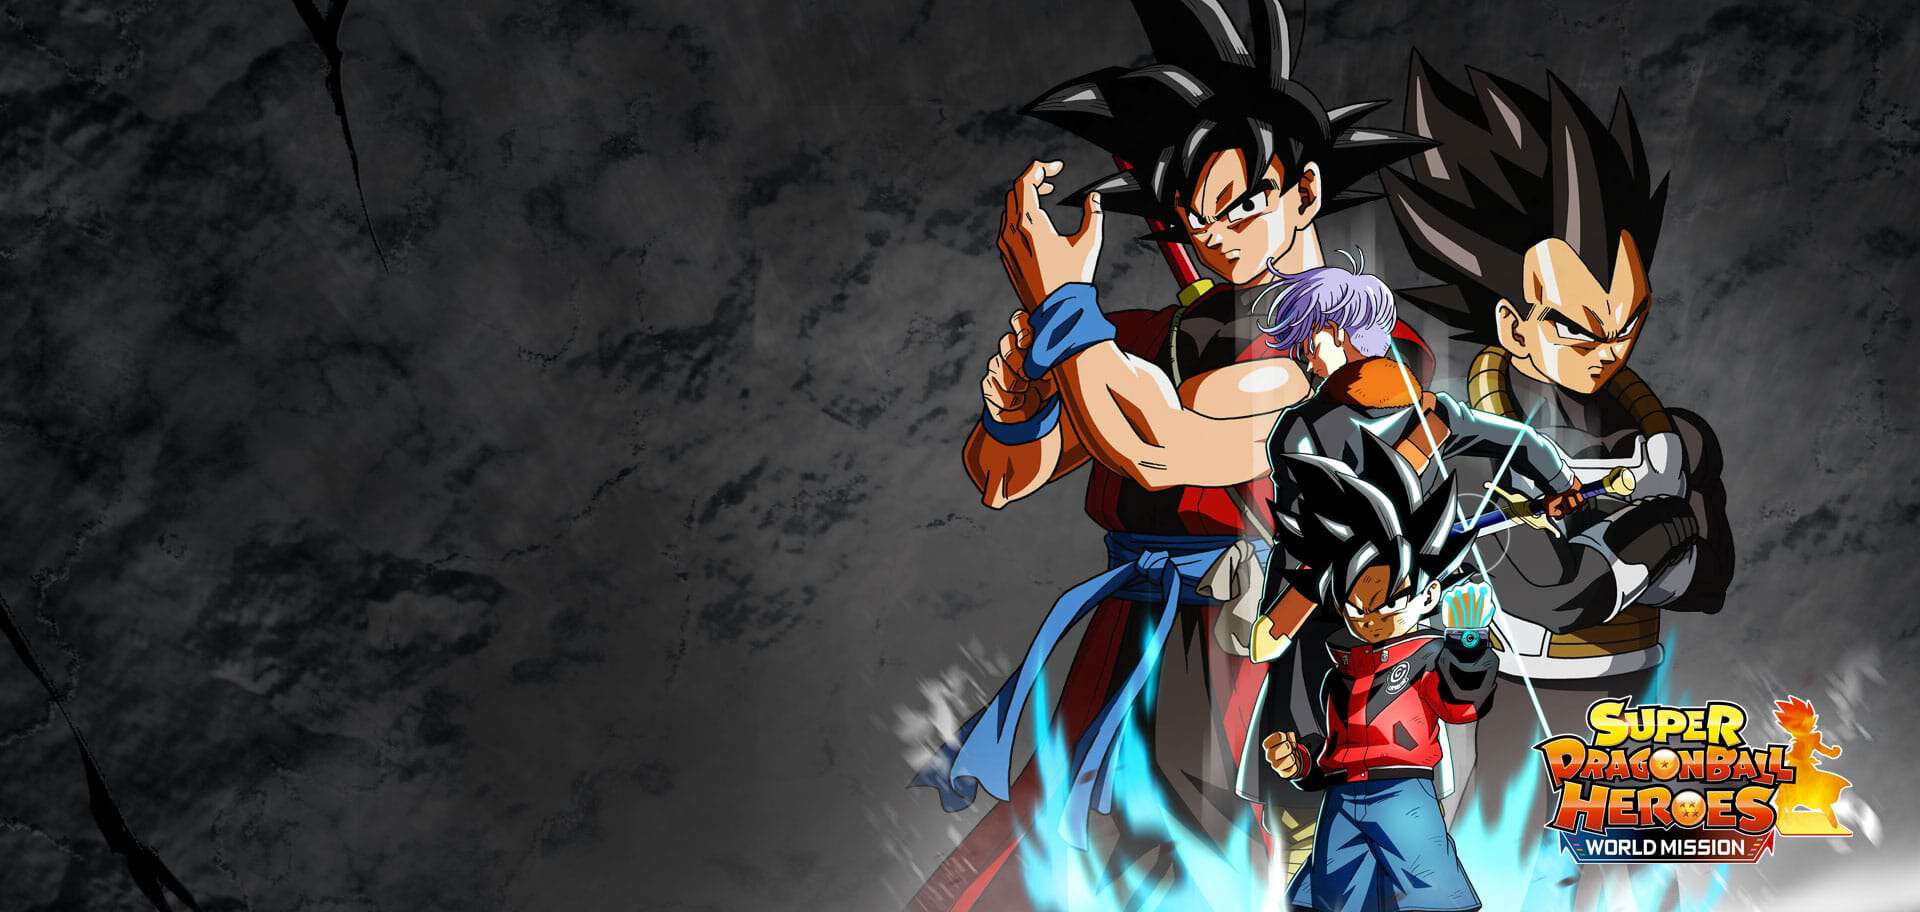 Super Dragon Ball Heroes World Mission System Free Download Full Version